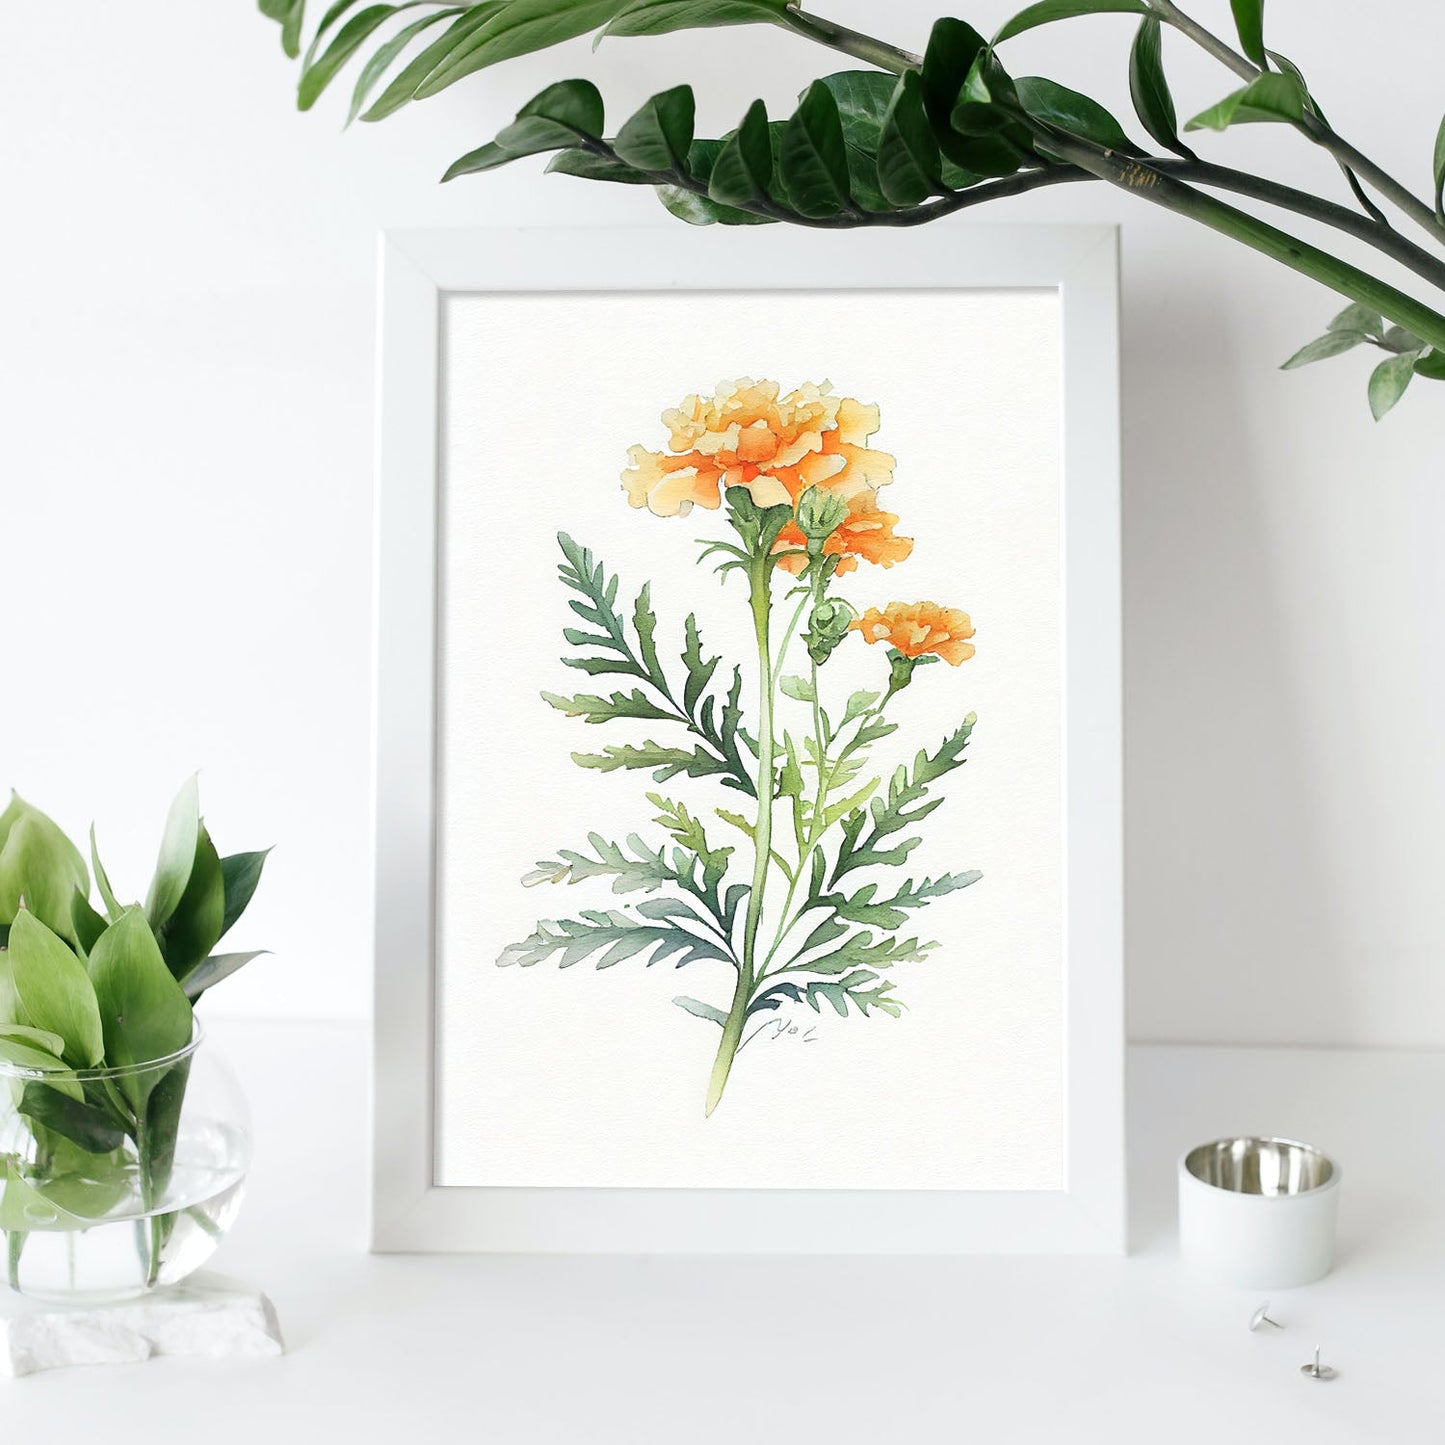 Nacnic watercolor minmal Marigold_4. Aesthetic Wall Art Prints for Bedroom or Living Room Design.